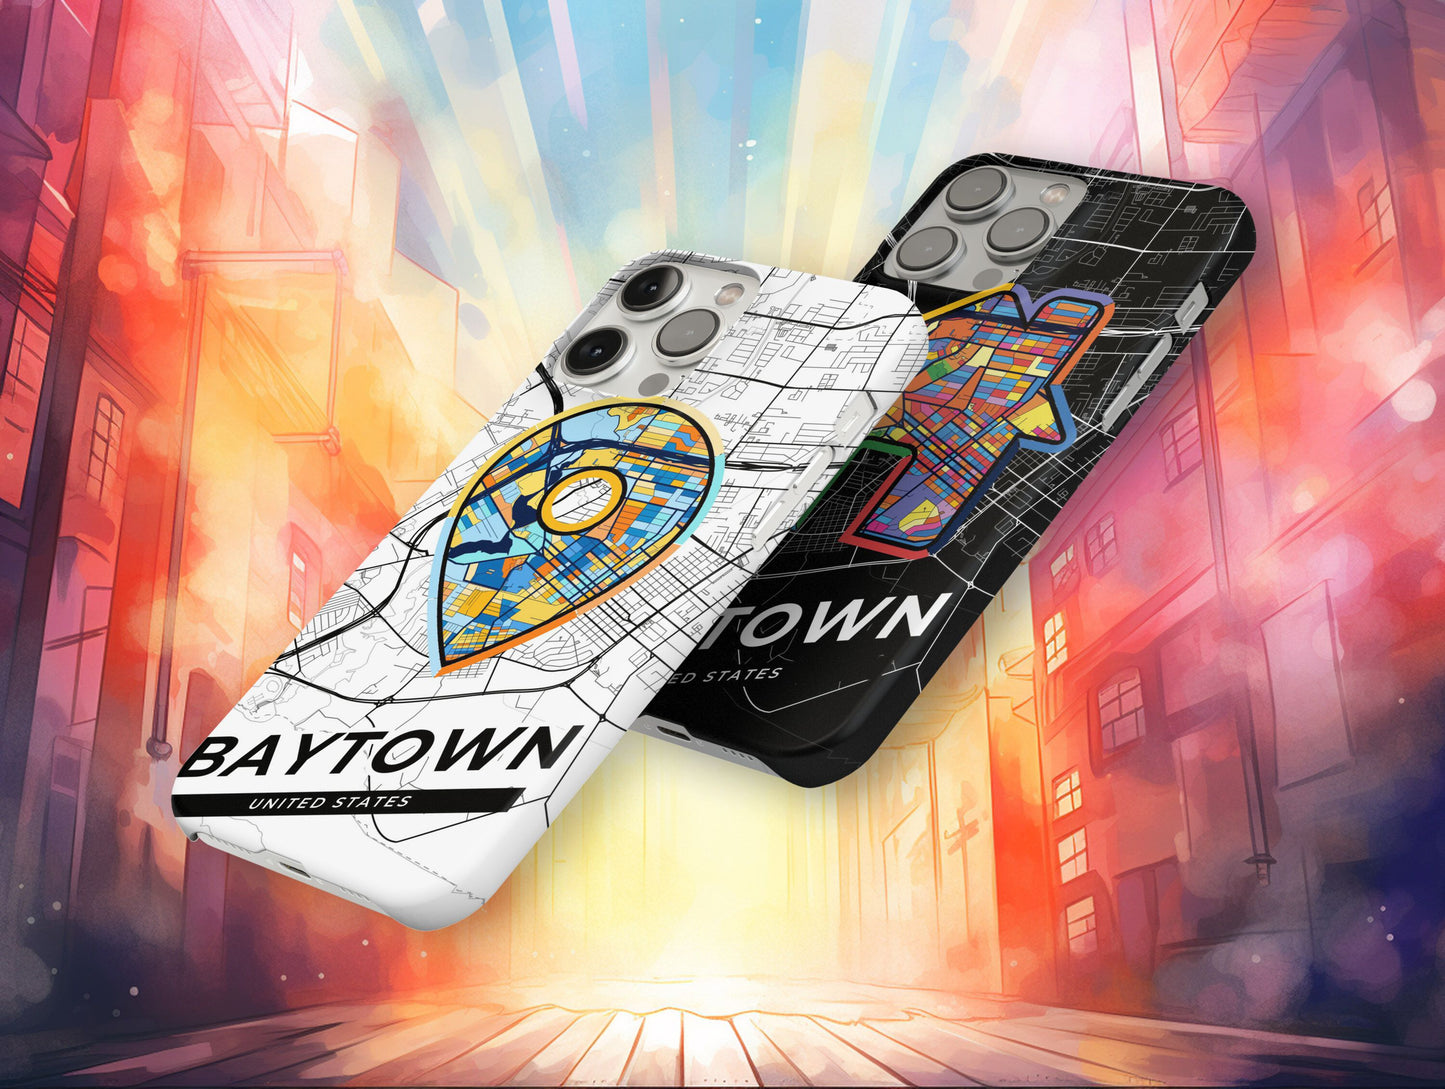 Baytown Texas slim phone case with colorful icon. Birthday, wedding or housewarming gift. Couple match cases.